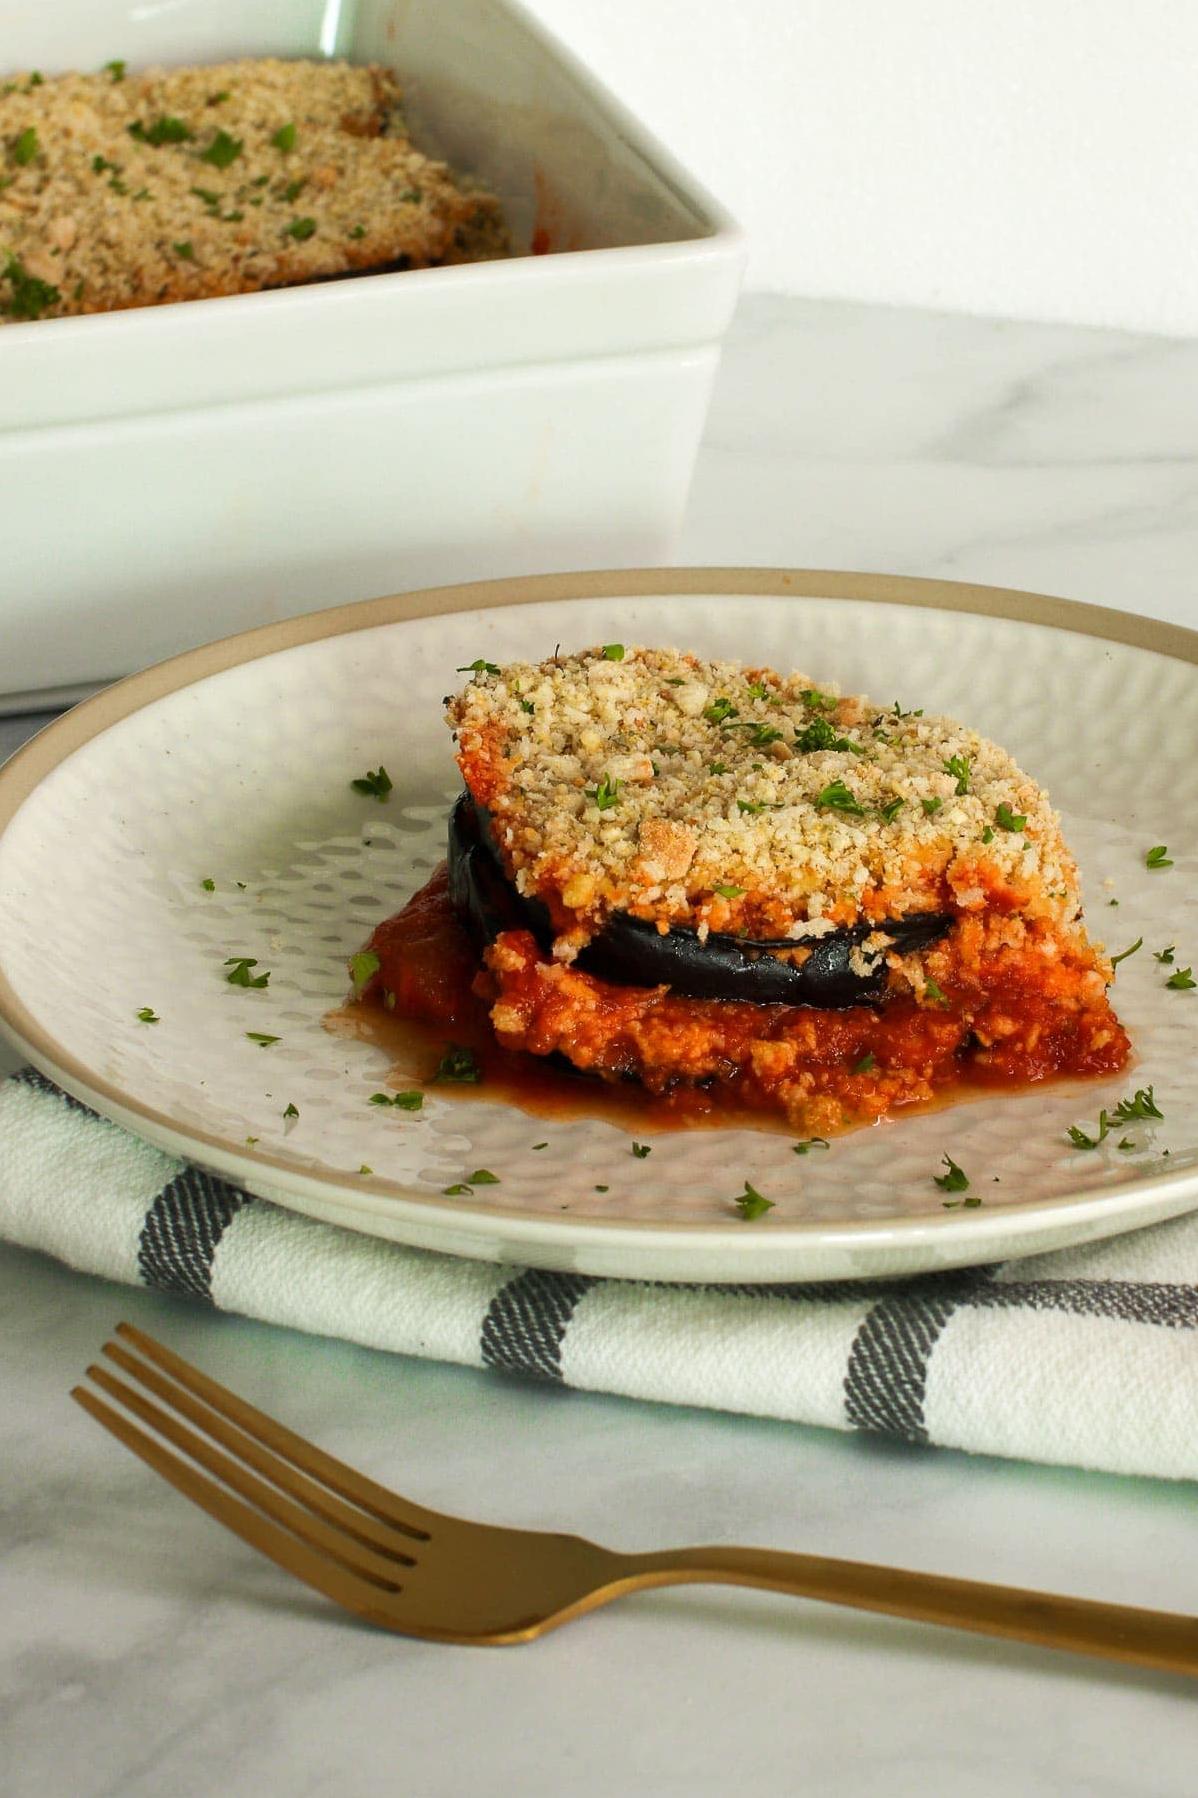  It’s time to upgrade your weeknight dinner with this Vegan Eggplant Parmigiana!